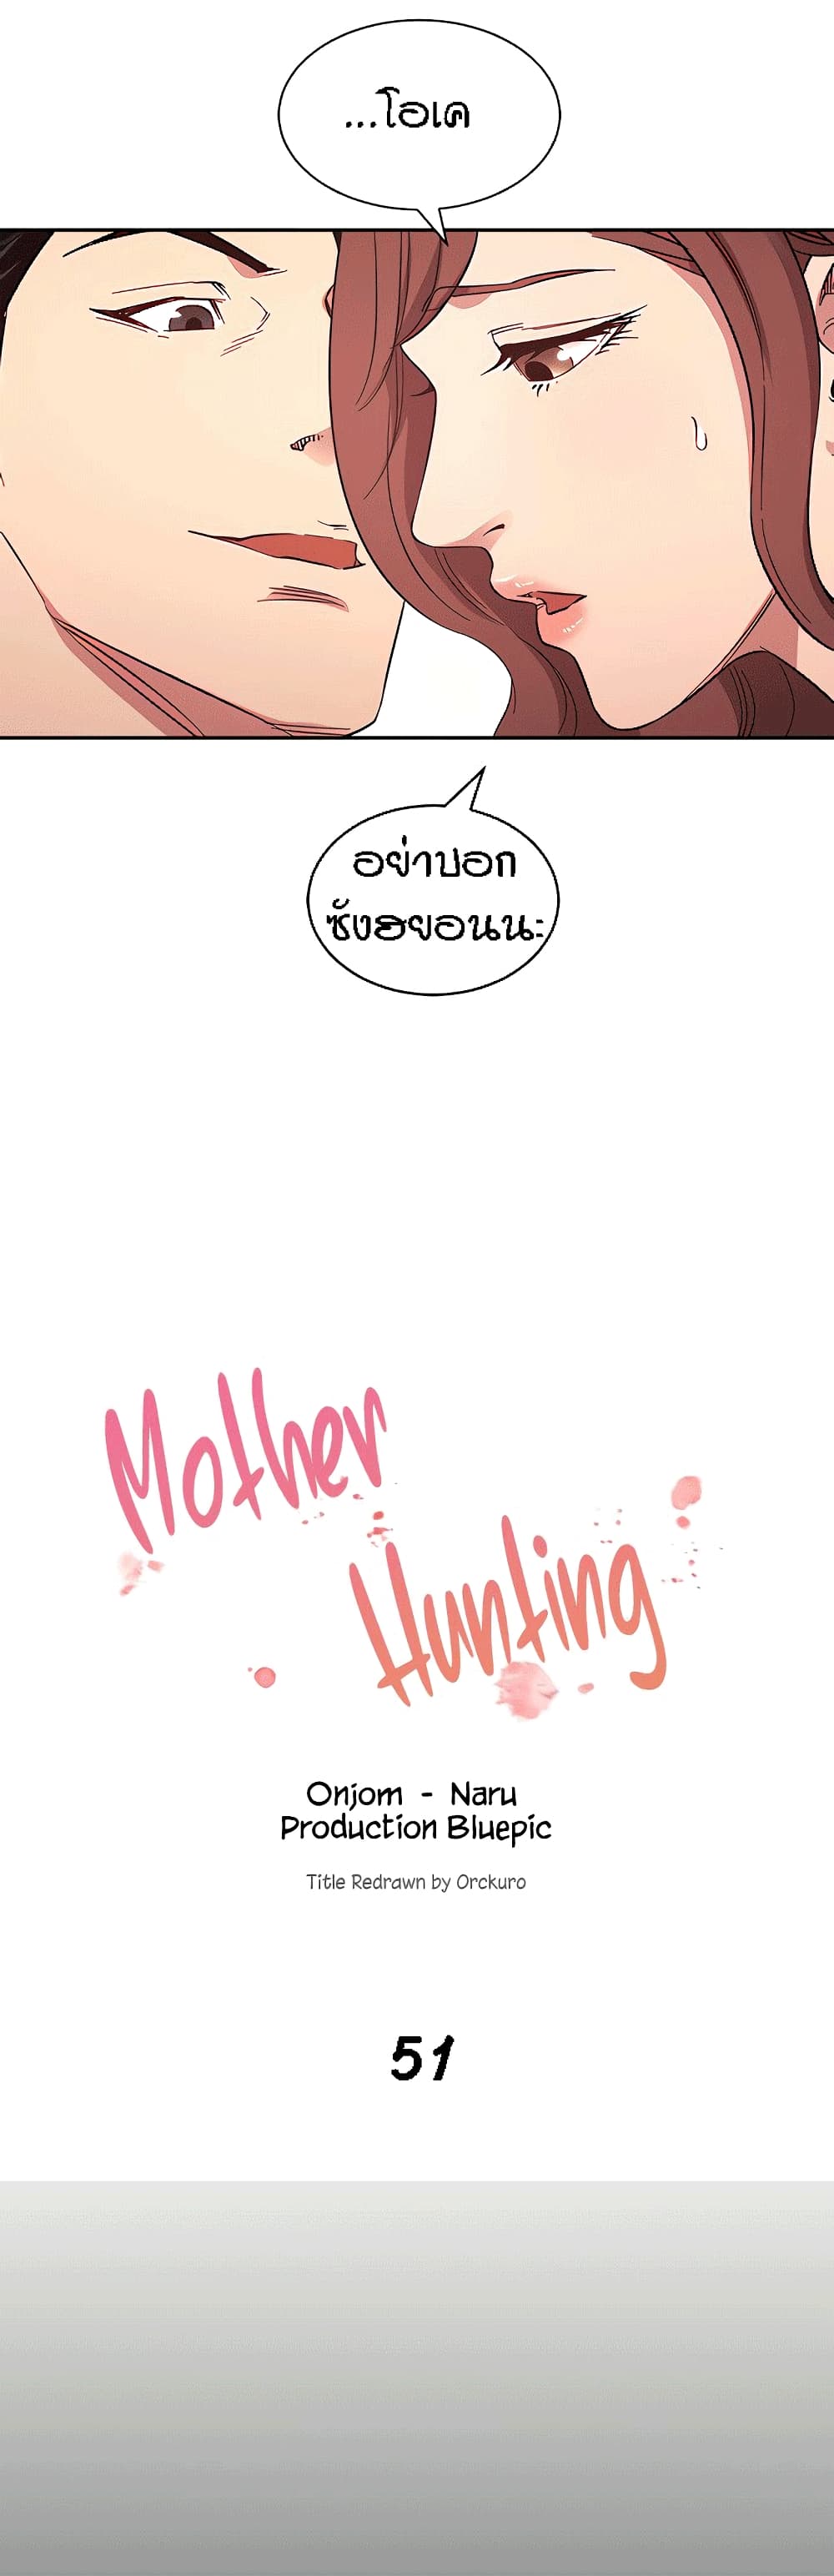 Mother Hunting 51 (6)